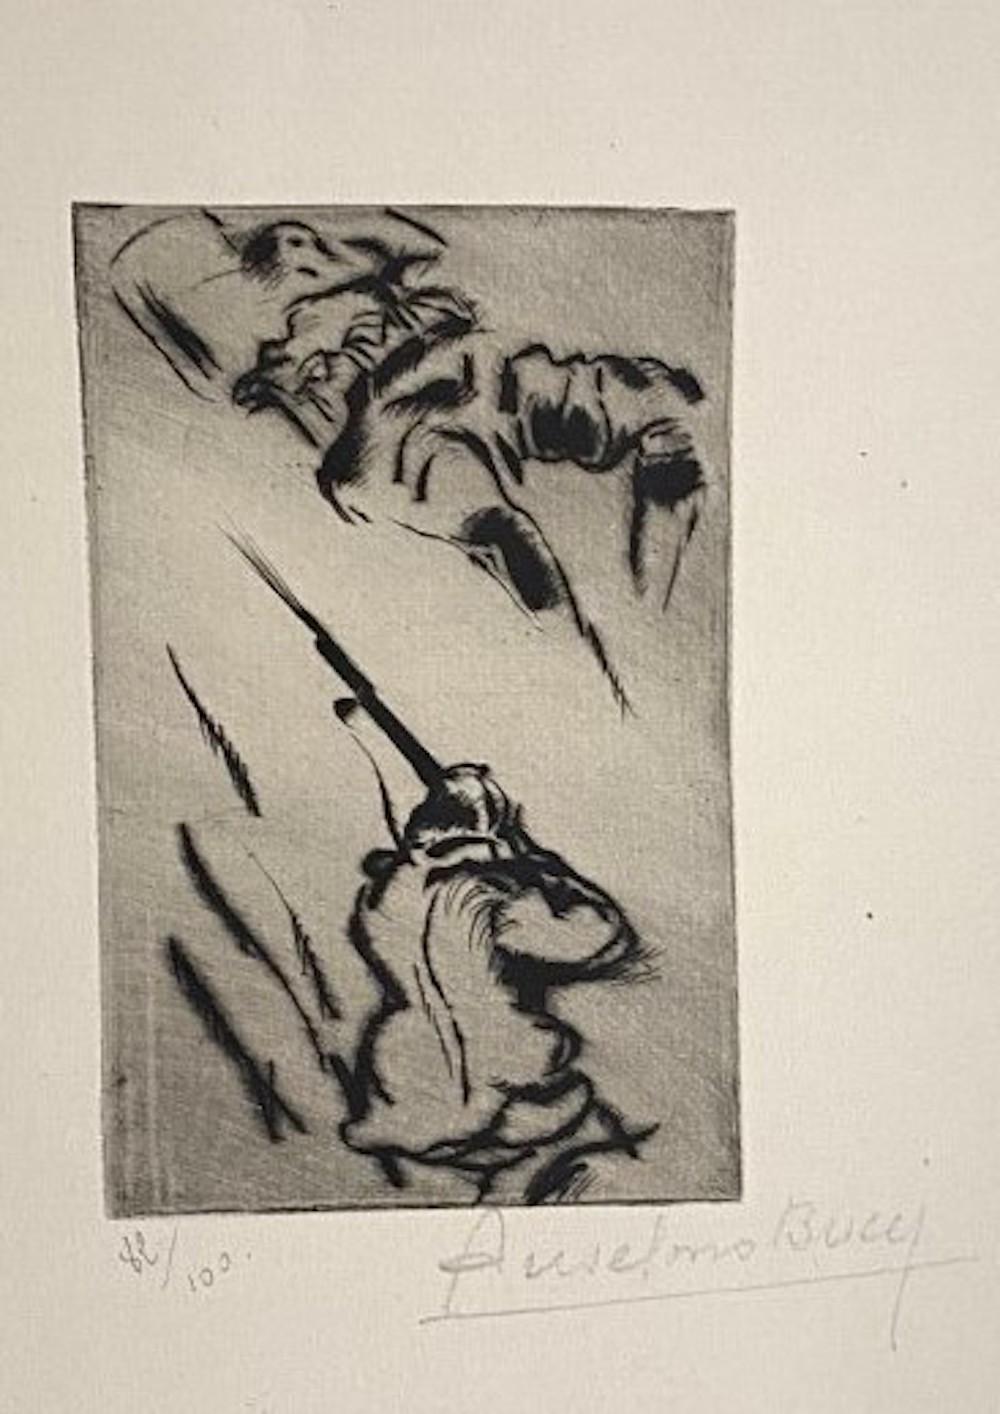 "Military" 1917 is a beautiful print in etching technique, realized by Anselmo Bucci (1887-1955).

Hand signed. Numbered 82/100 of prints on the lower left. On the lower left corner, an illegible iscription written in pencil.

Anselmo Bucci